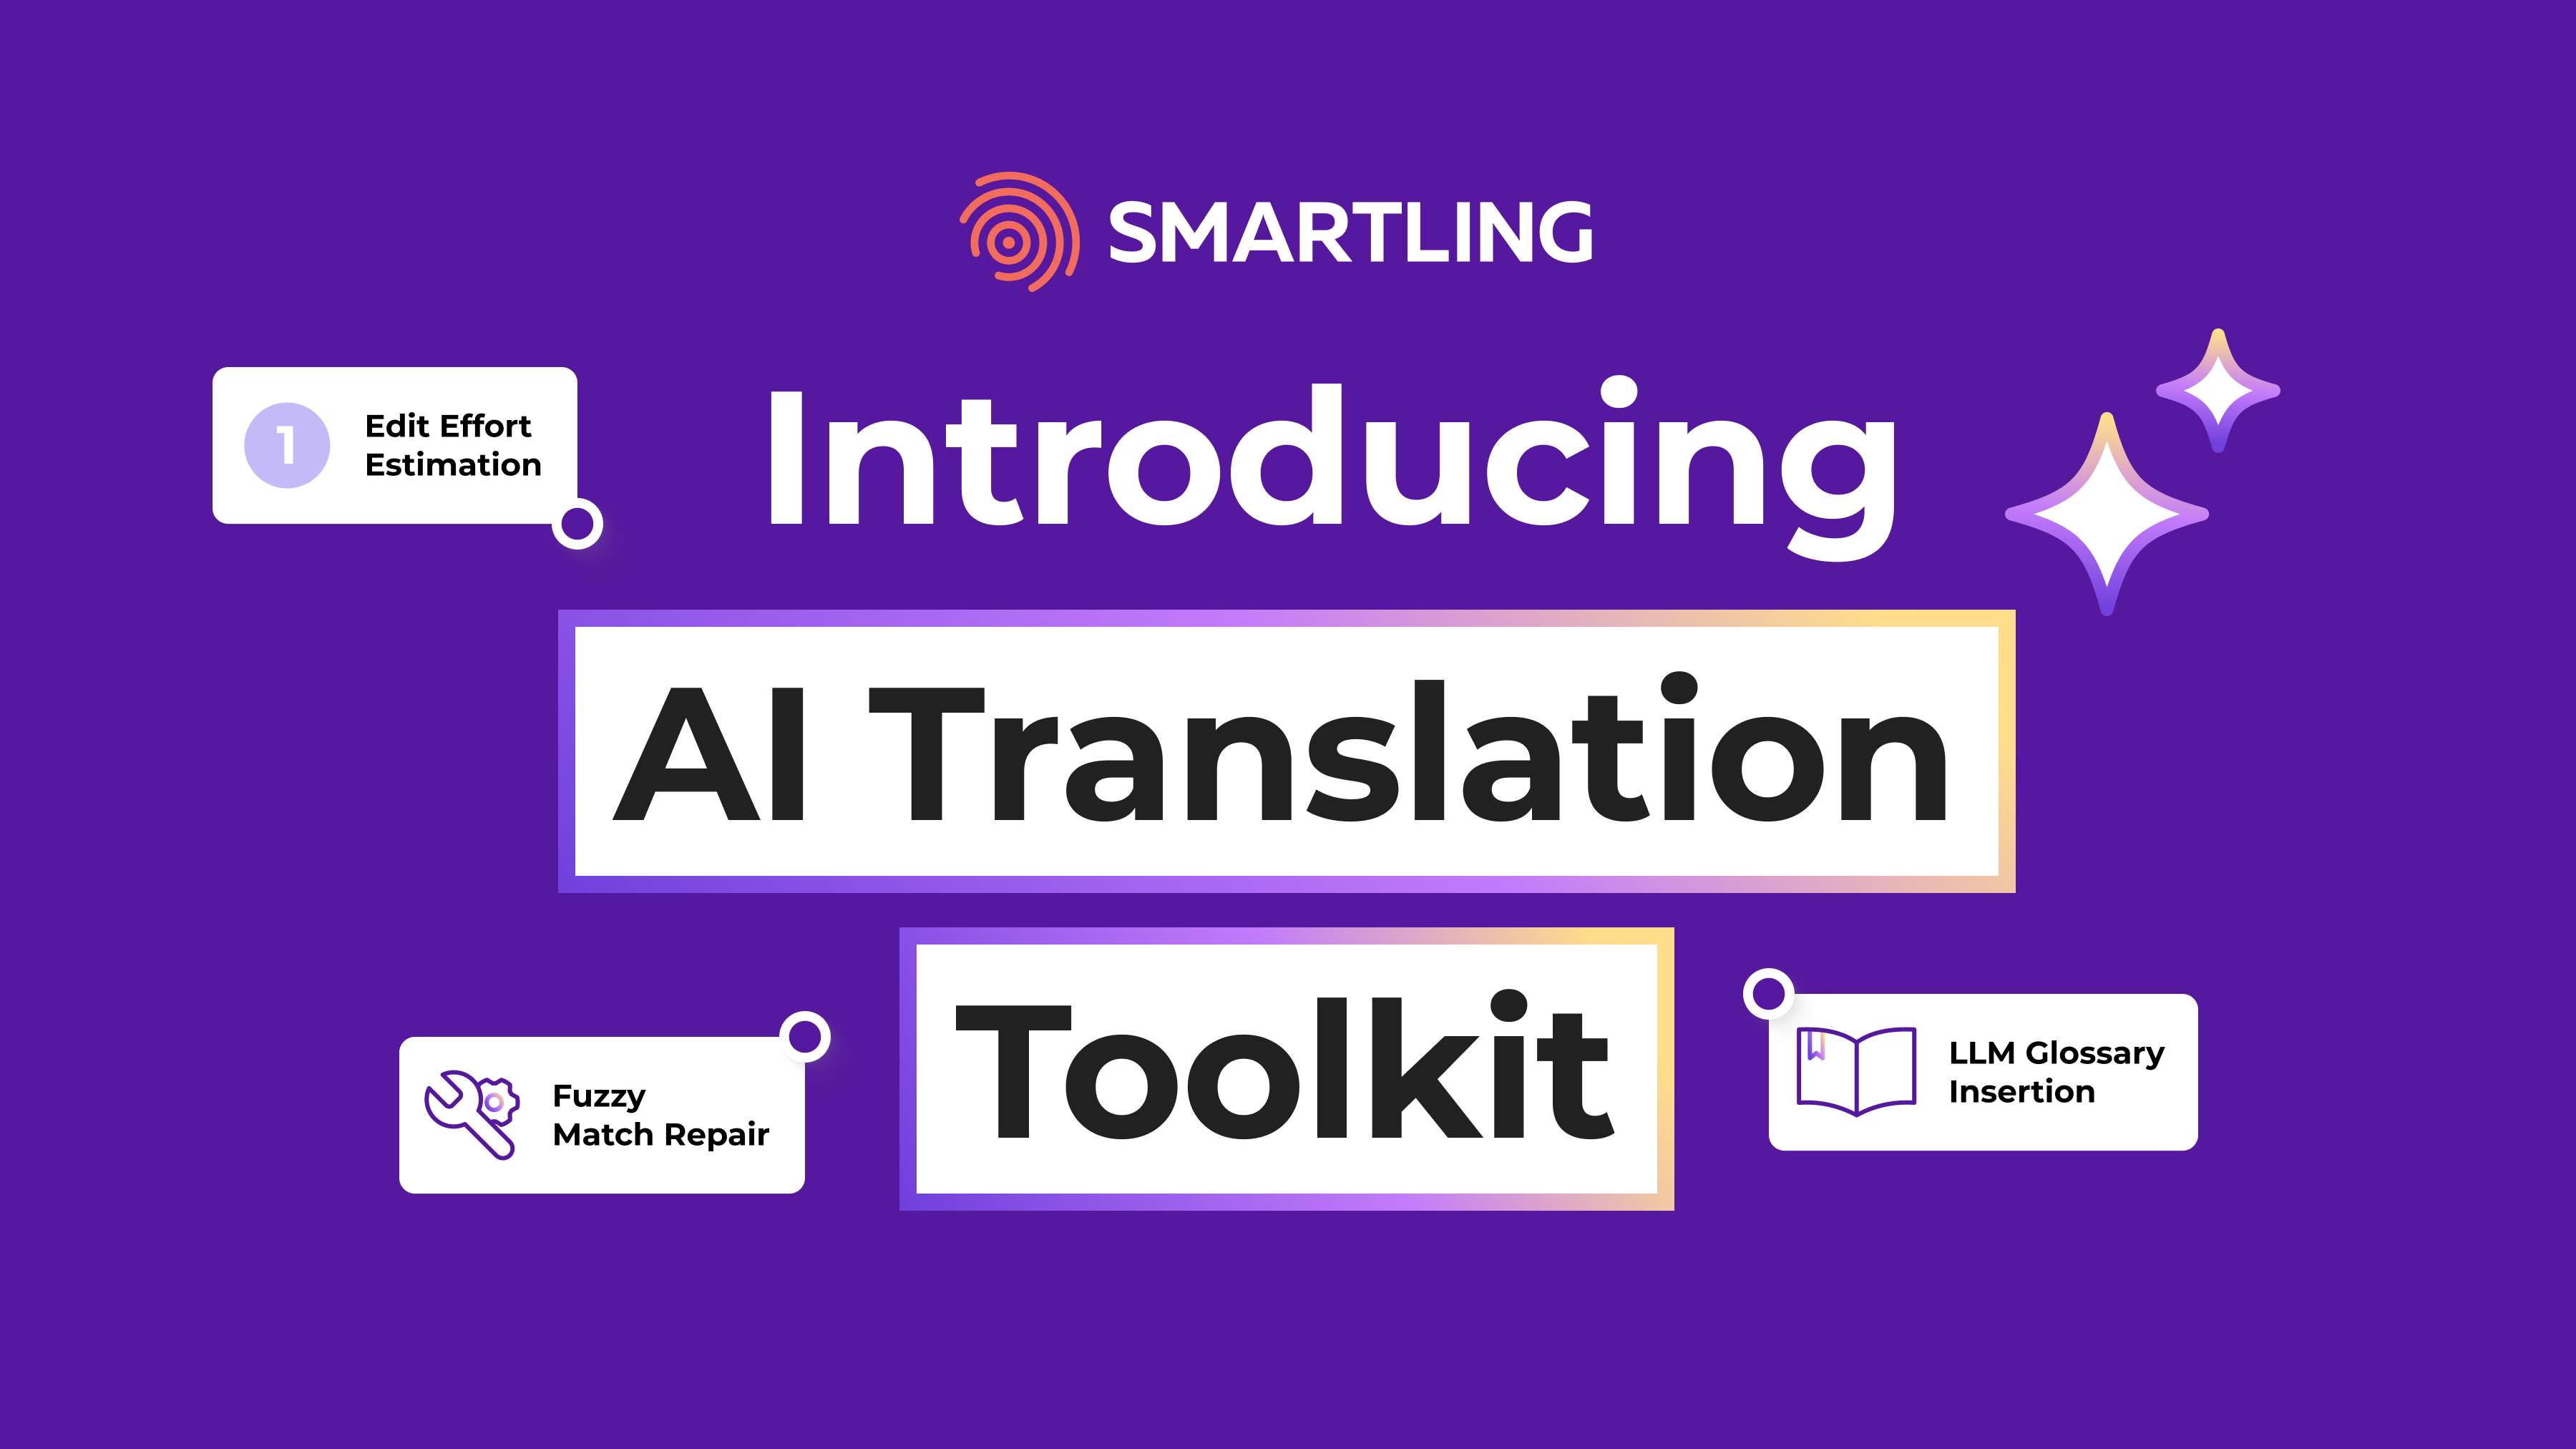 Smartling announces the AI Translation Toolkit